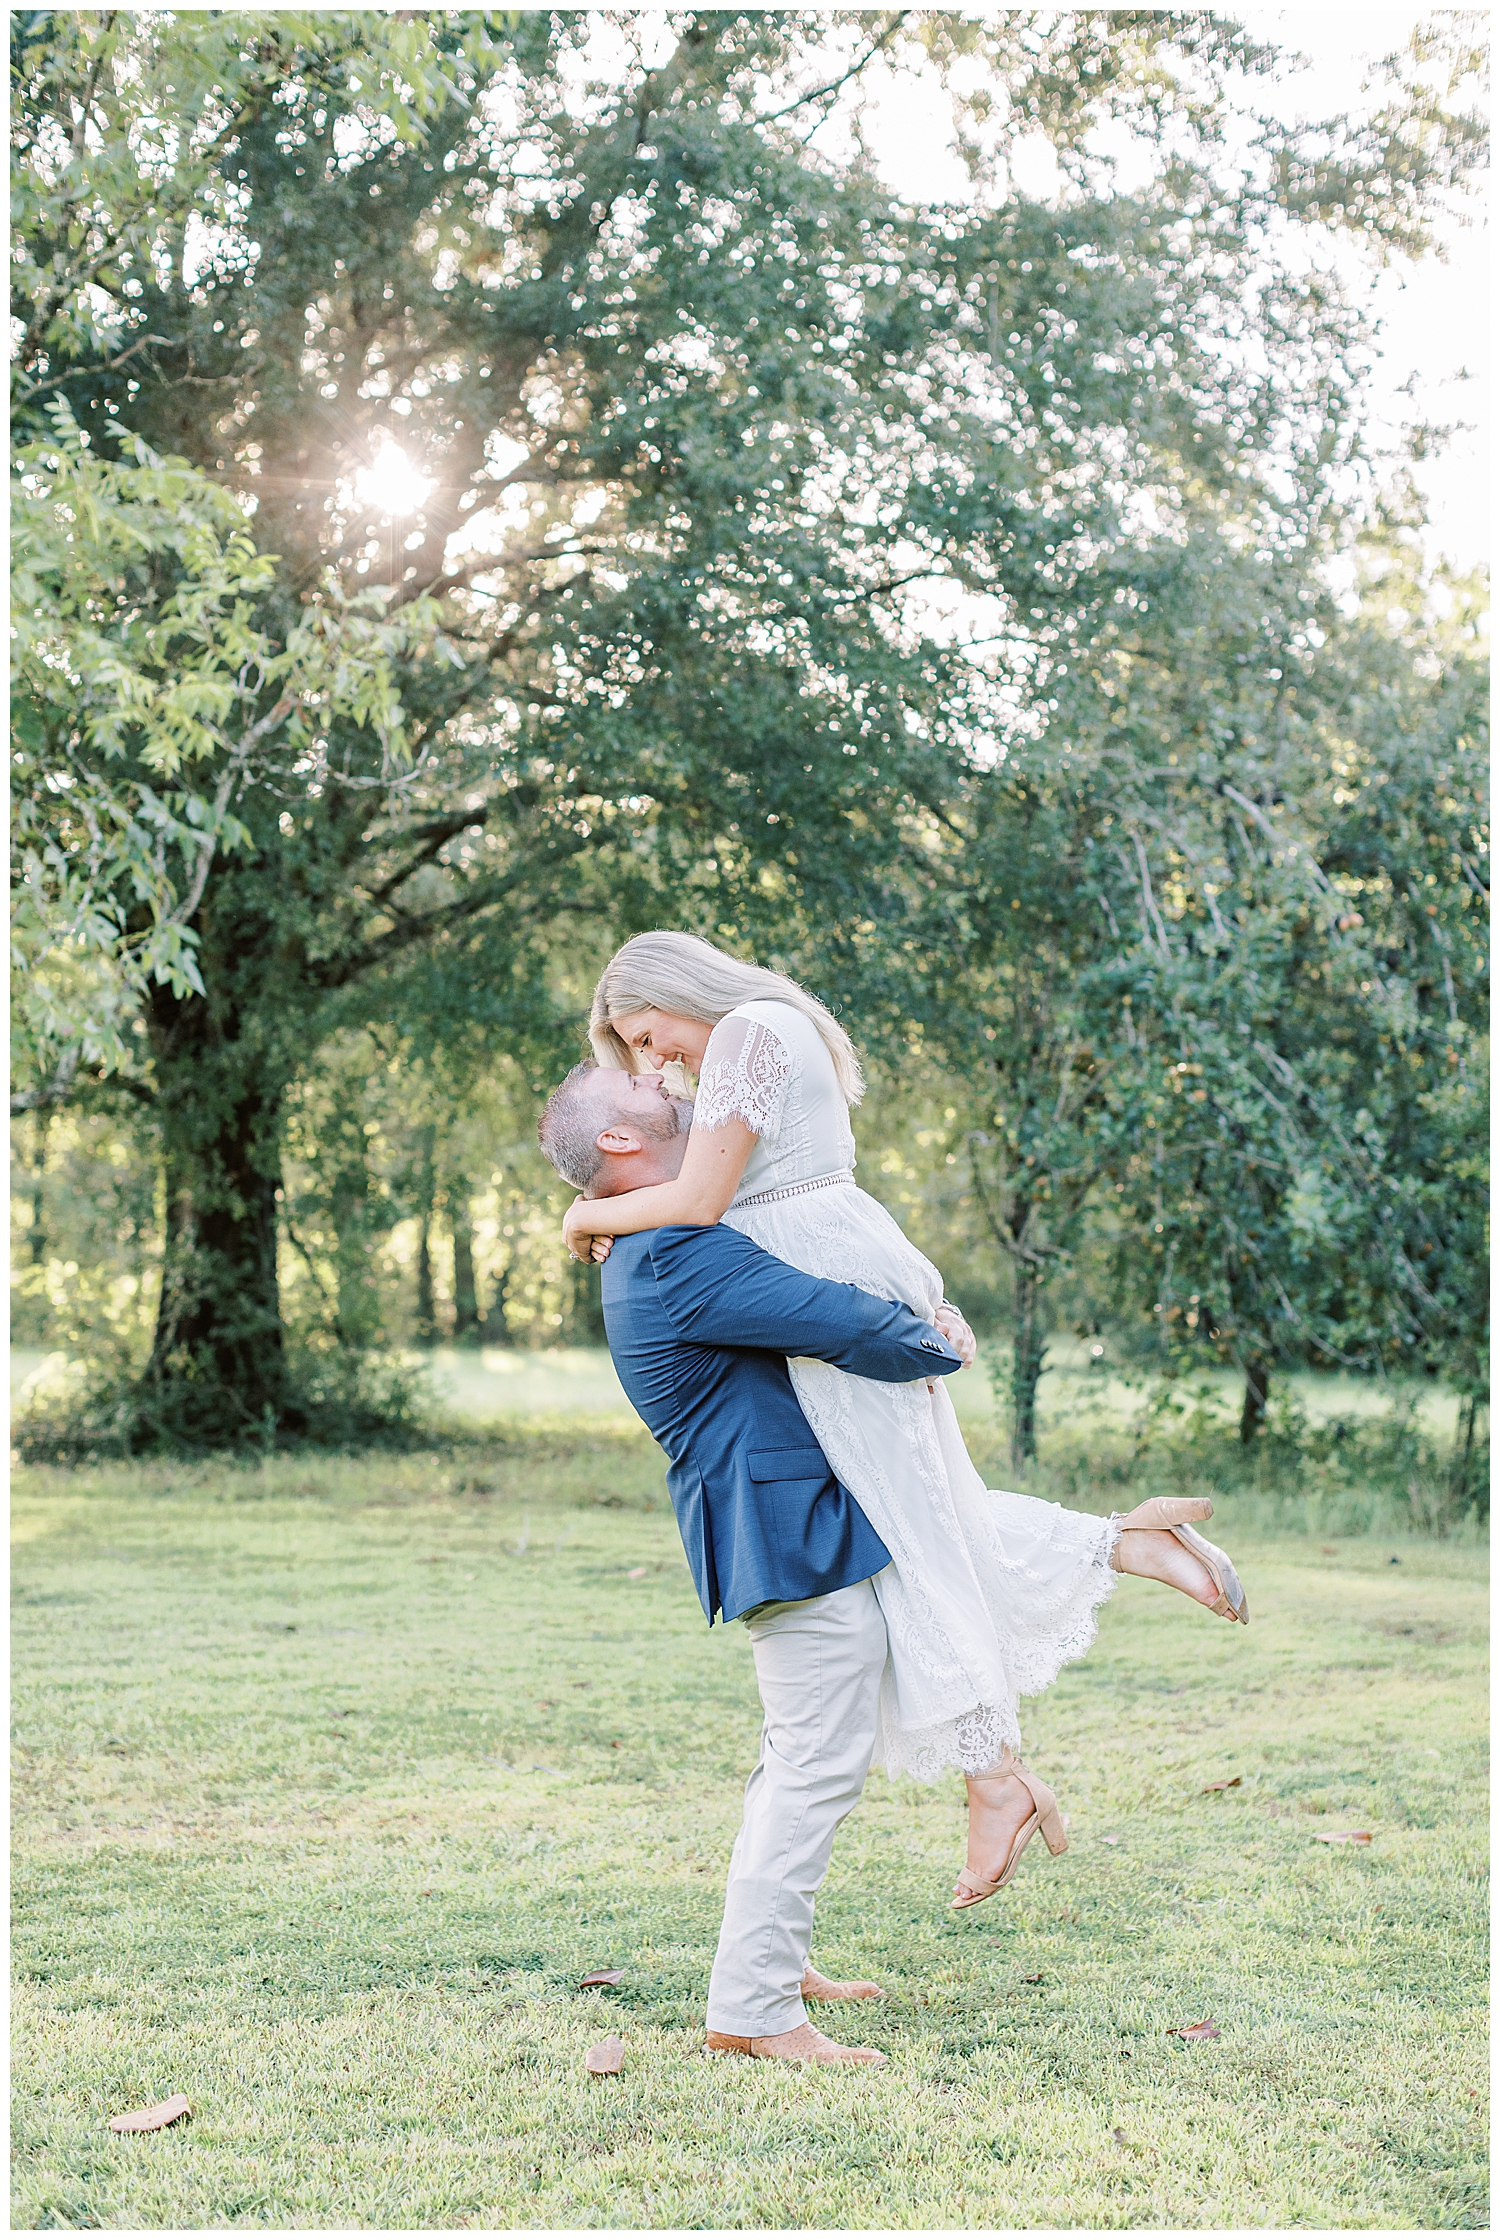 Juliann Riggs Photography captures engagement photos of a couple embracing each other.